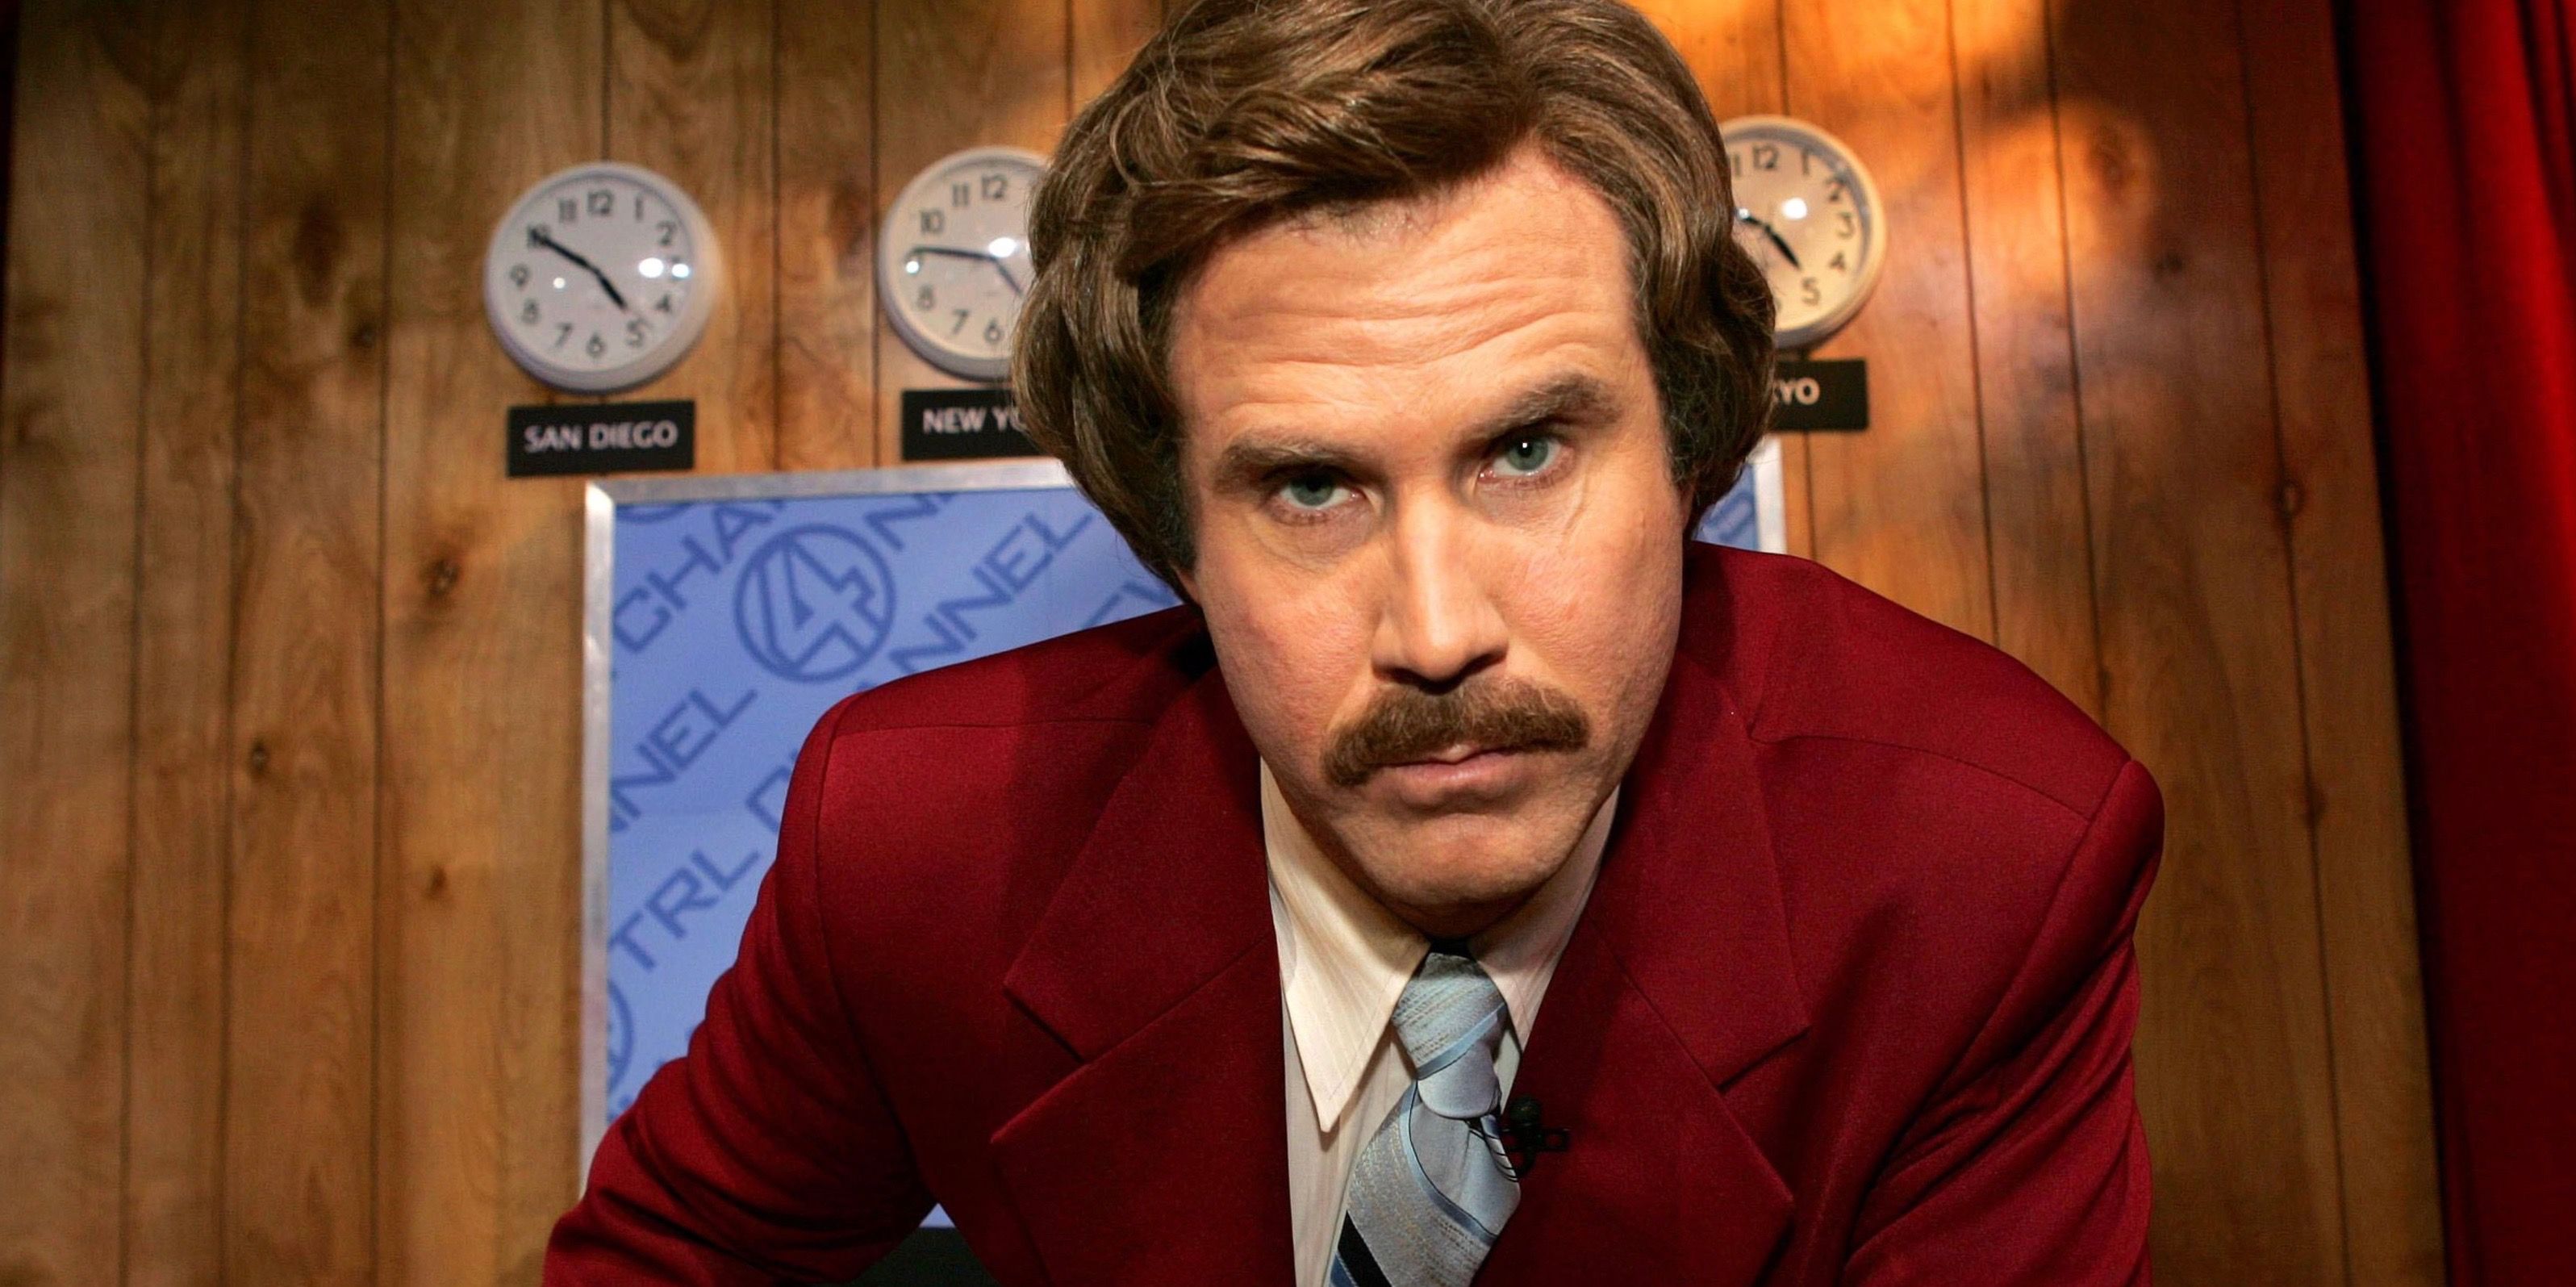 Will Ferrell as Ron Burgundy in Anchorman 2 The Legend Continues